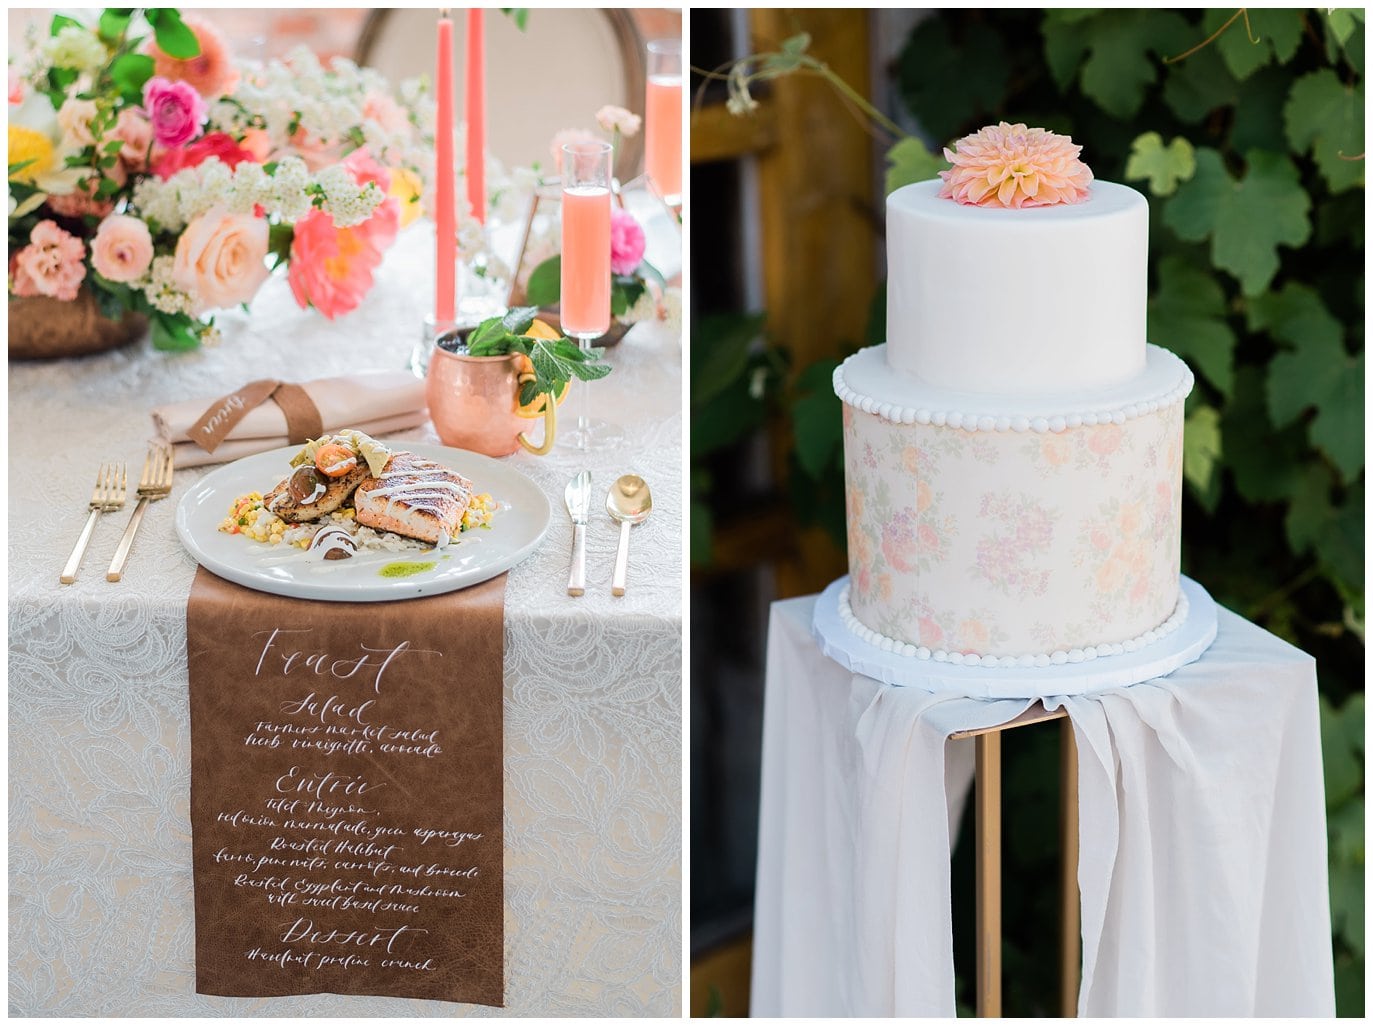 custom watercolor wedding cake and leather menu place settings at summer blanc wedding by Boulder wedding photographer Jennie Crate photographer